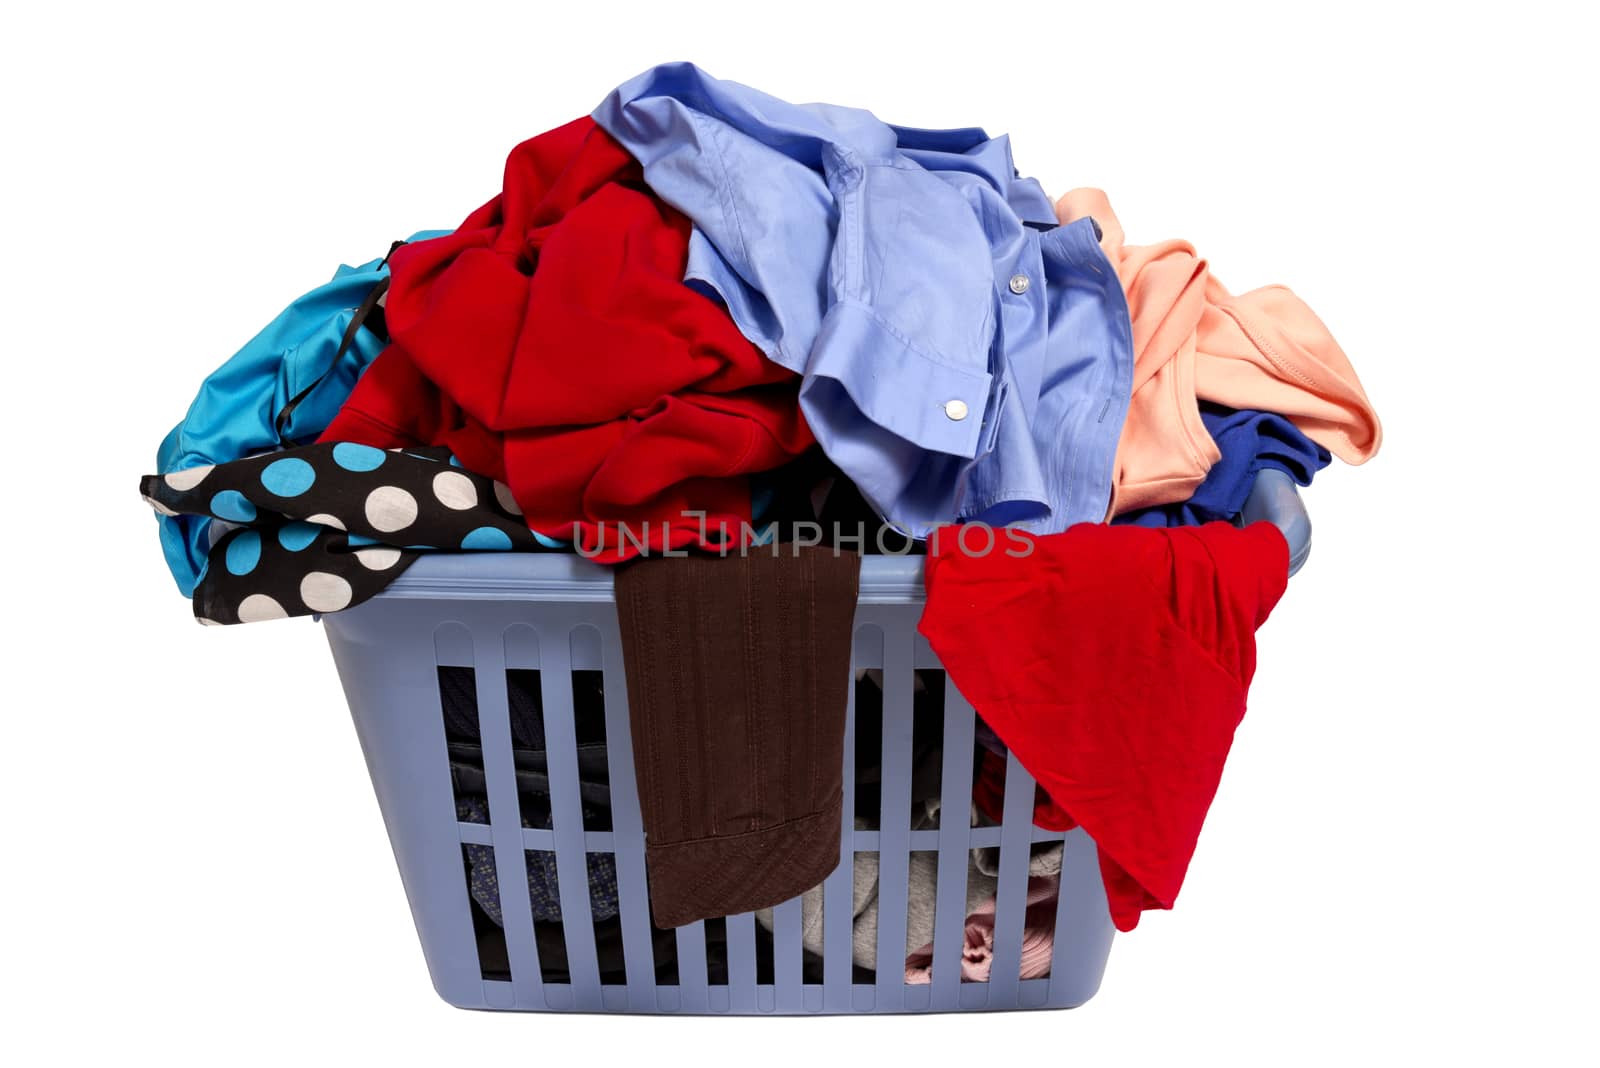 Horizontal shot of a laundry basket full of clothes.